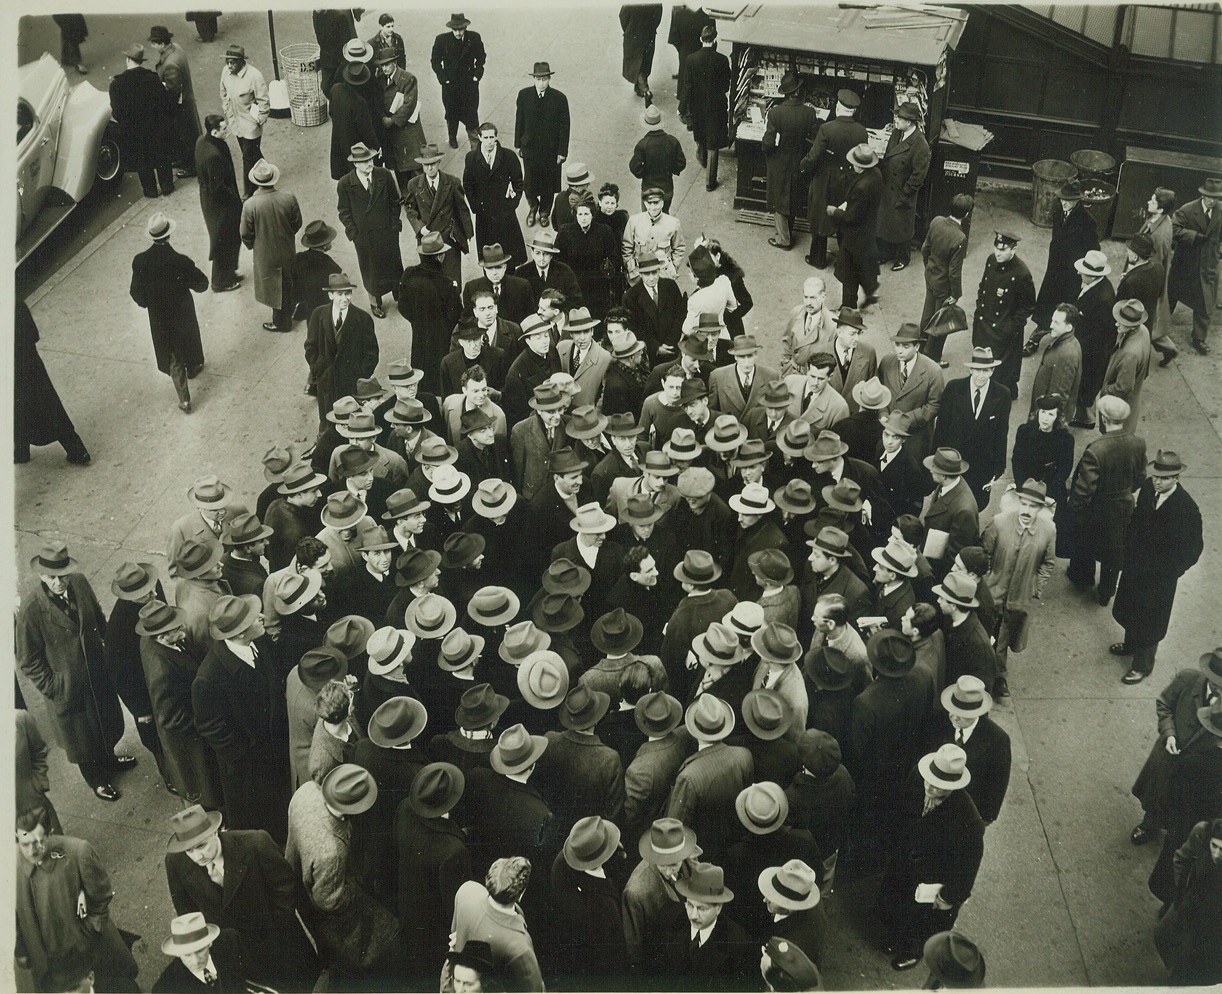 CROWDS IN TIMES SQUARE DISCUSS “AIR RAID”, 12/9/41  NEW YORK, N.Y. – Crowd gathers around air raid warden (center, without hat) to discuss first air raid warning in history of New York City, in Times Square, Dec. 9 after “phony” report of enemy planes off Atlantic Coast had sent coastal defenses into swift action. Credit: OWI Radiophoto from ACME;